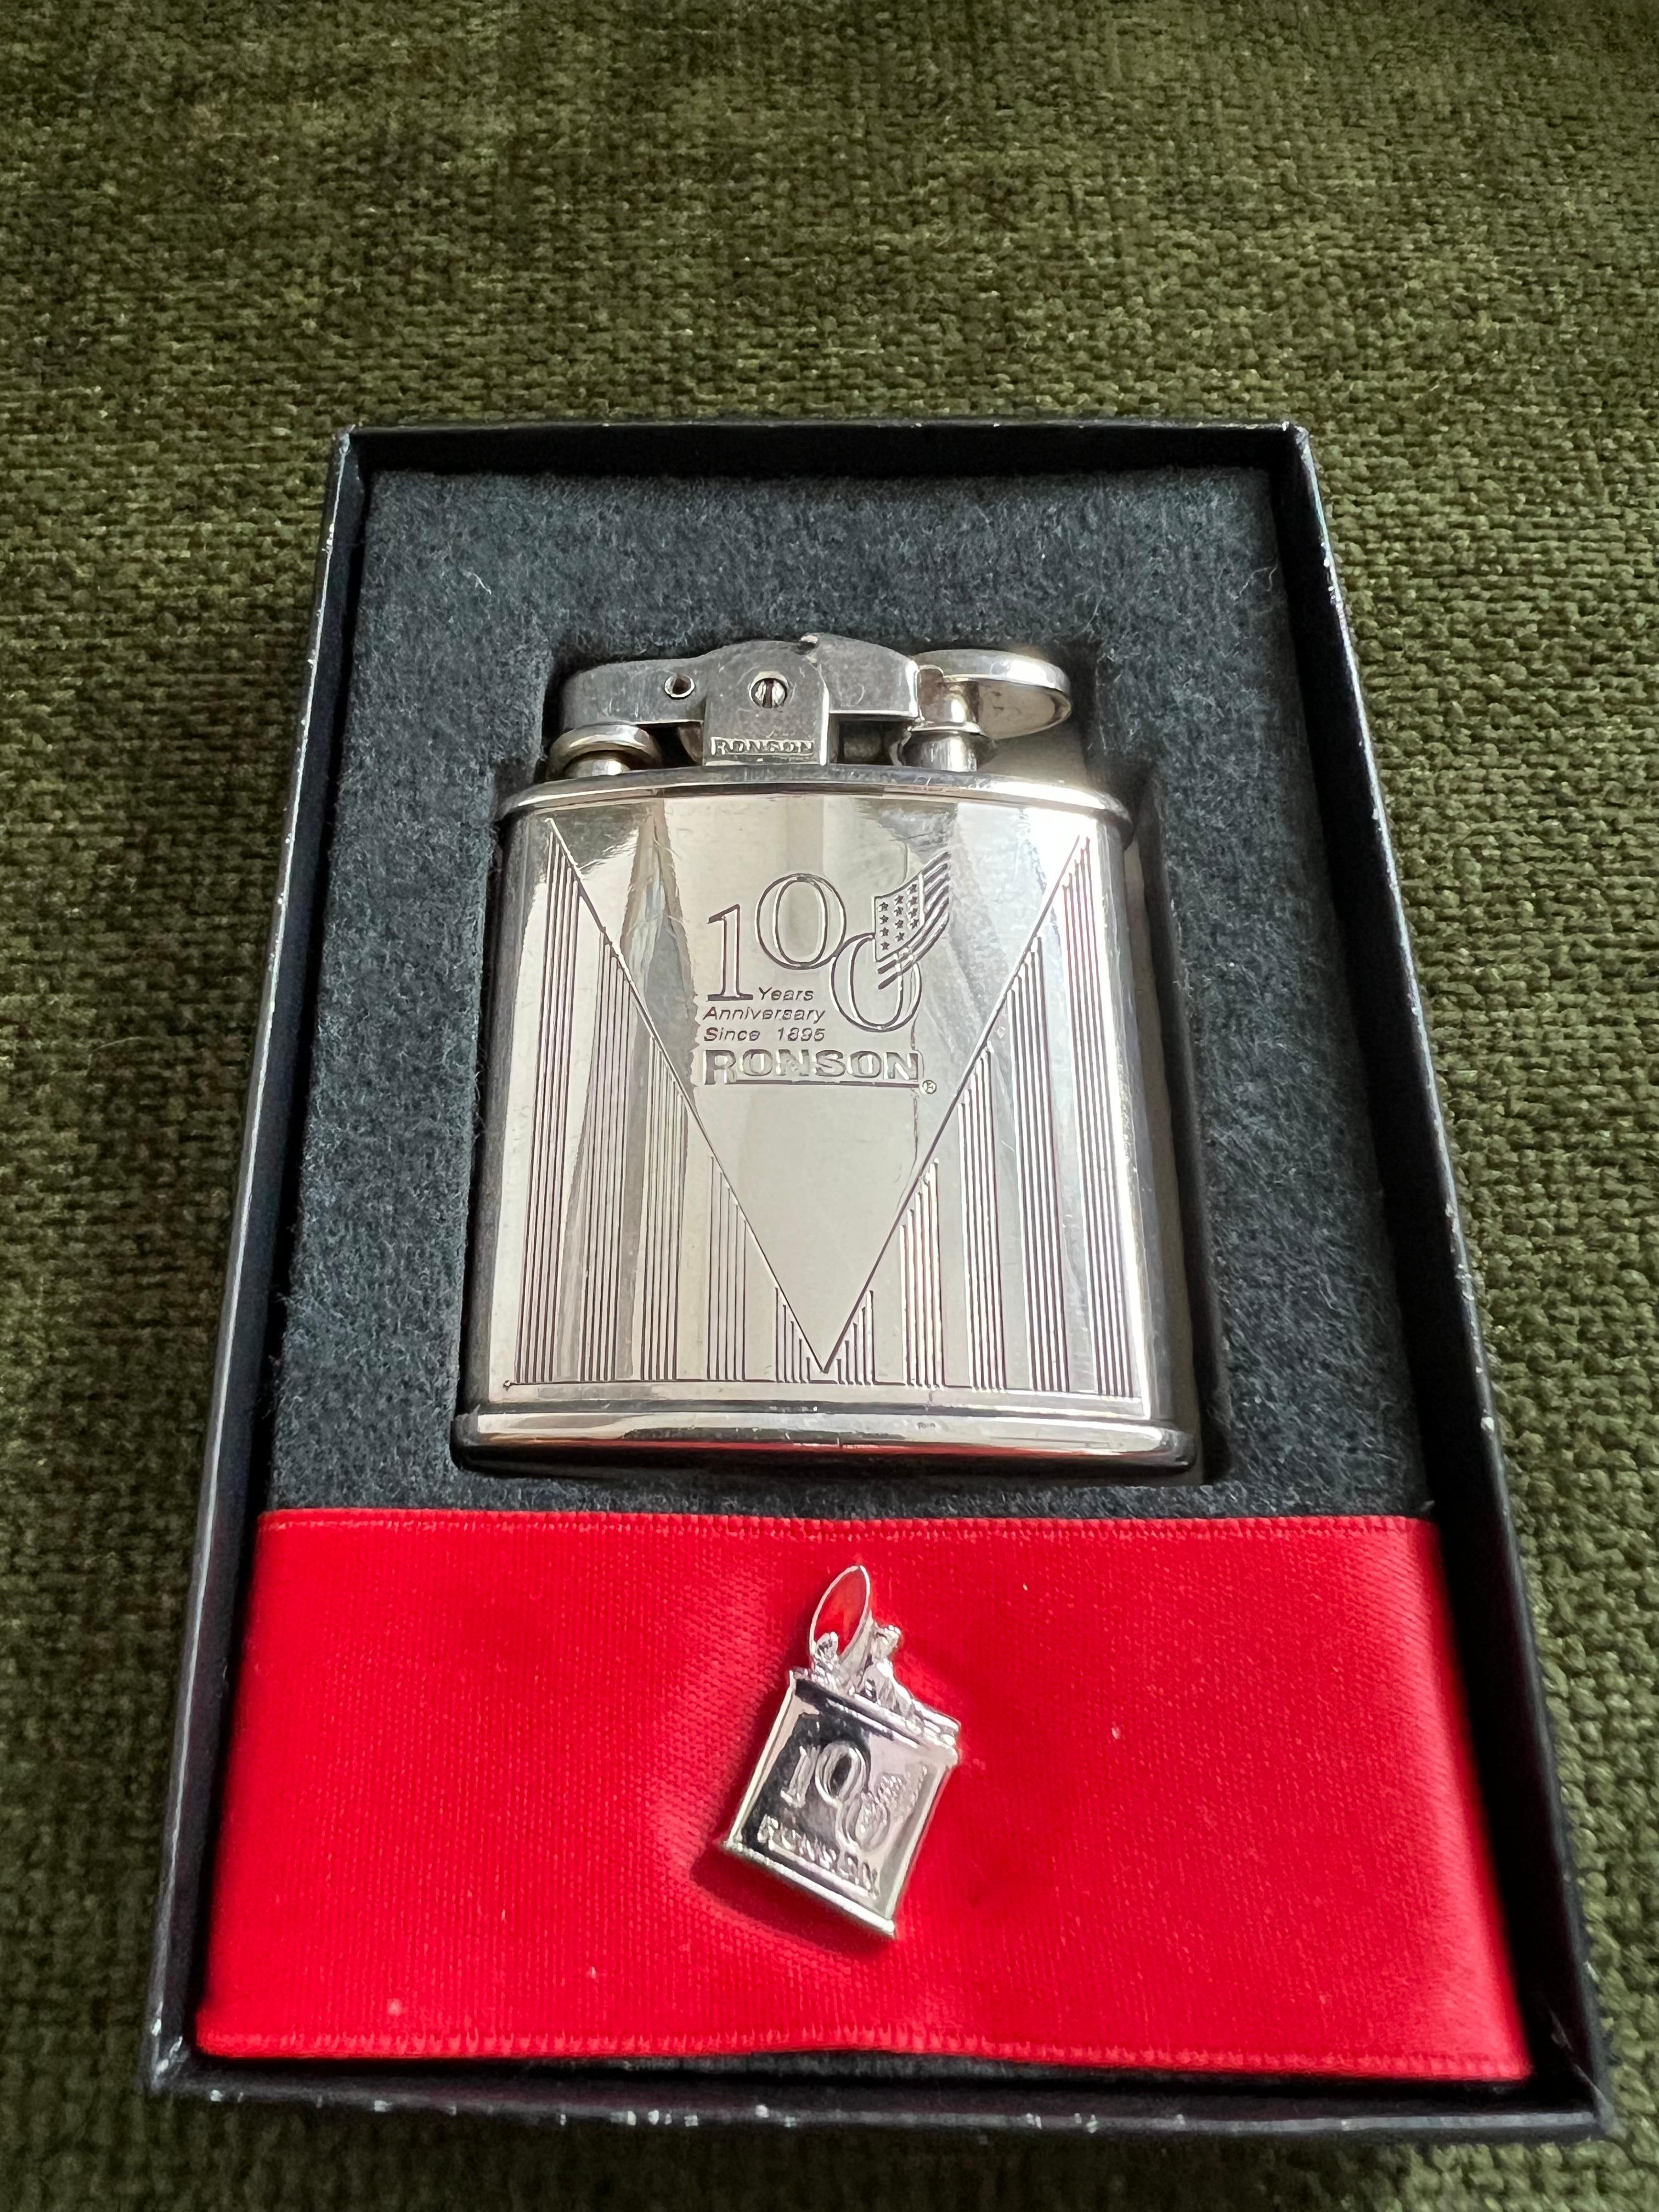 Ronson “1943” Limited Edition 100 Year Anniversary Silver Plated Vintage Lighter 5